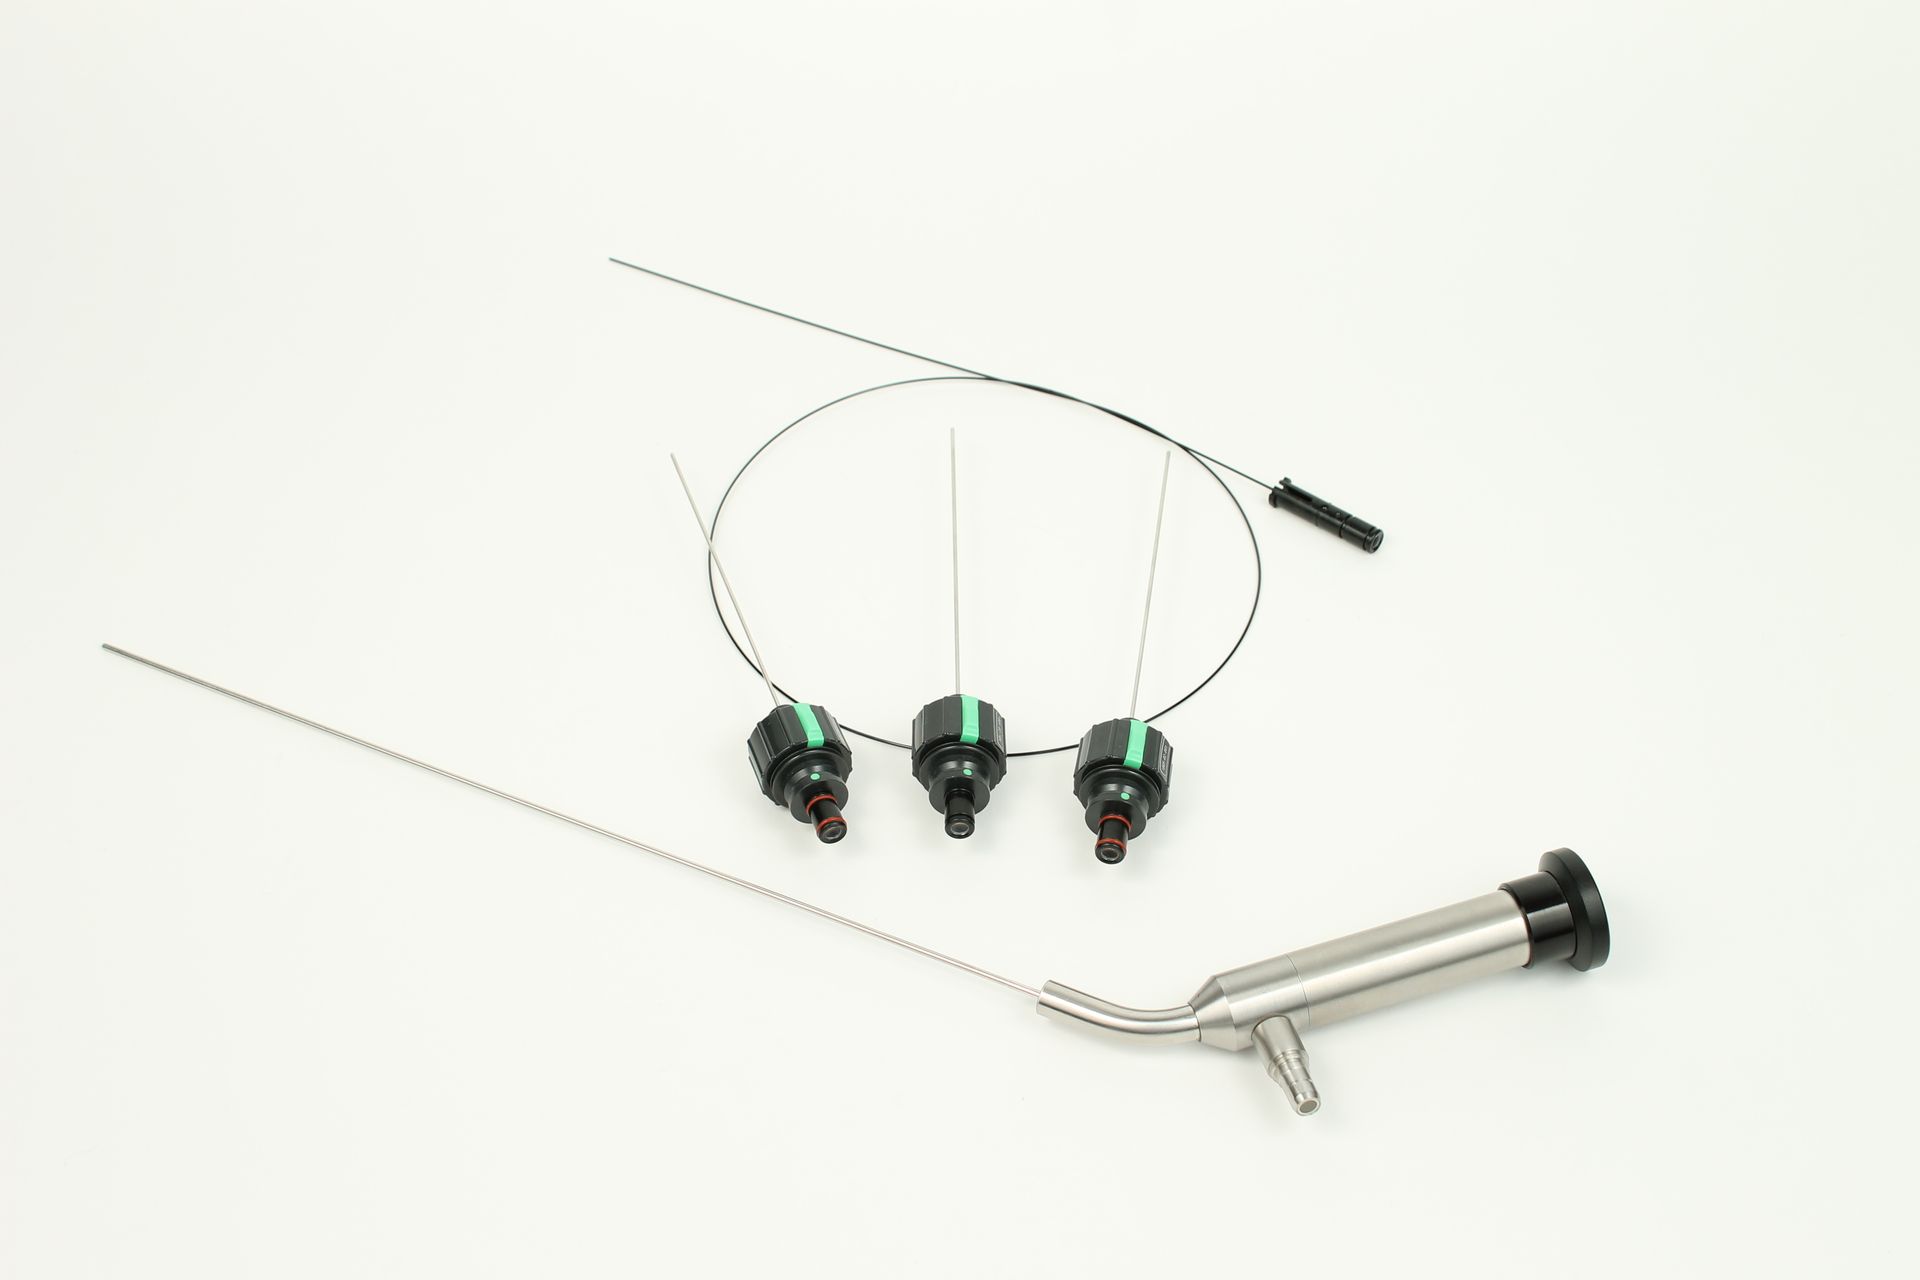 A pair of ear buds and a surgical instrument on a white surface